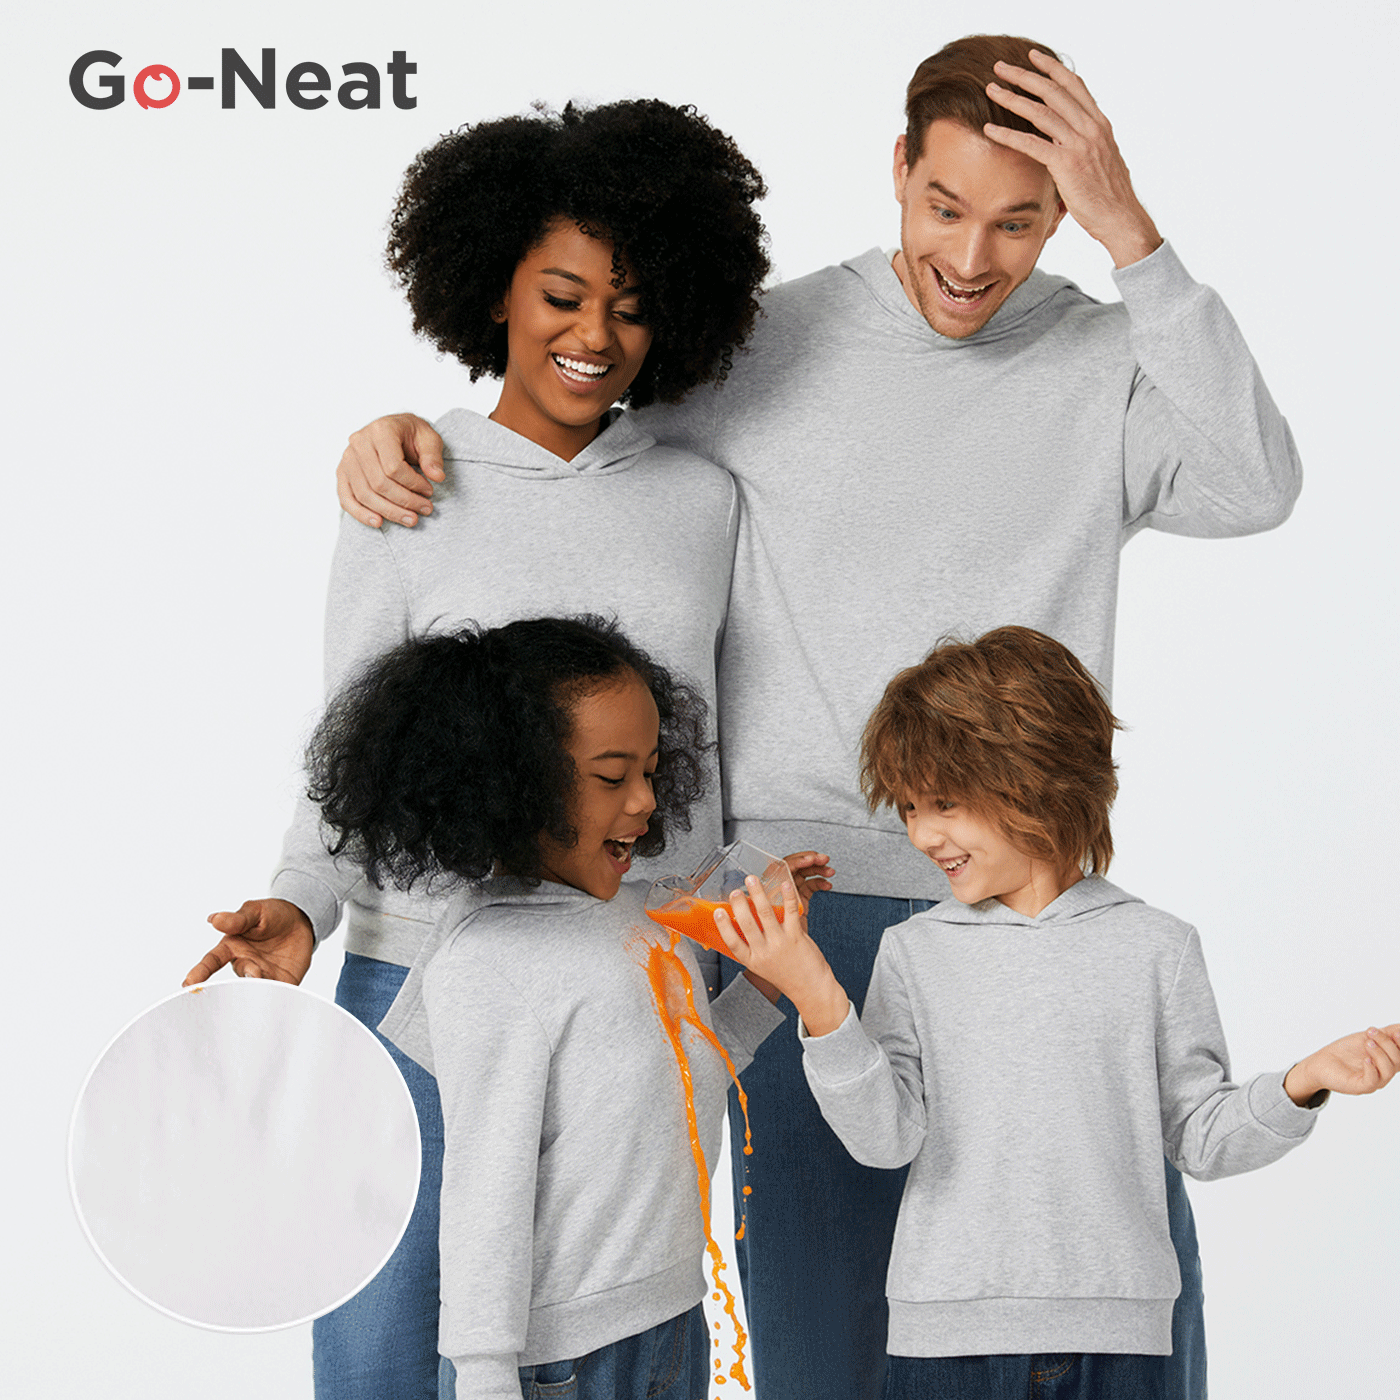 Go-Neat Water Repellent and Stain Resistant Family Matching Solid Hodded Sweatshirts Light Grey image 1